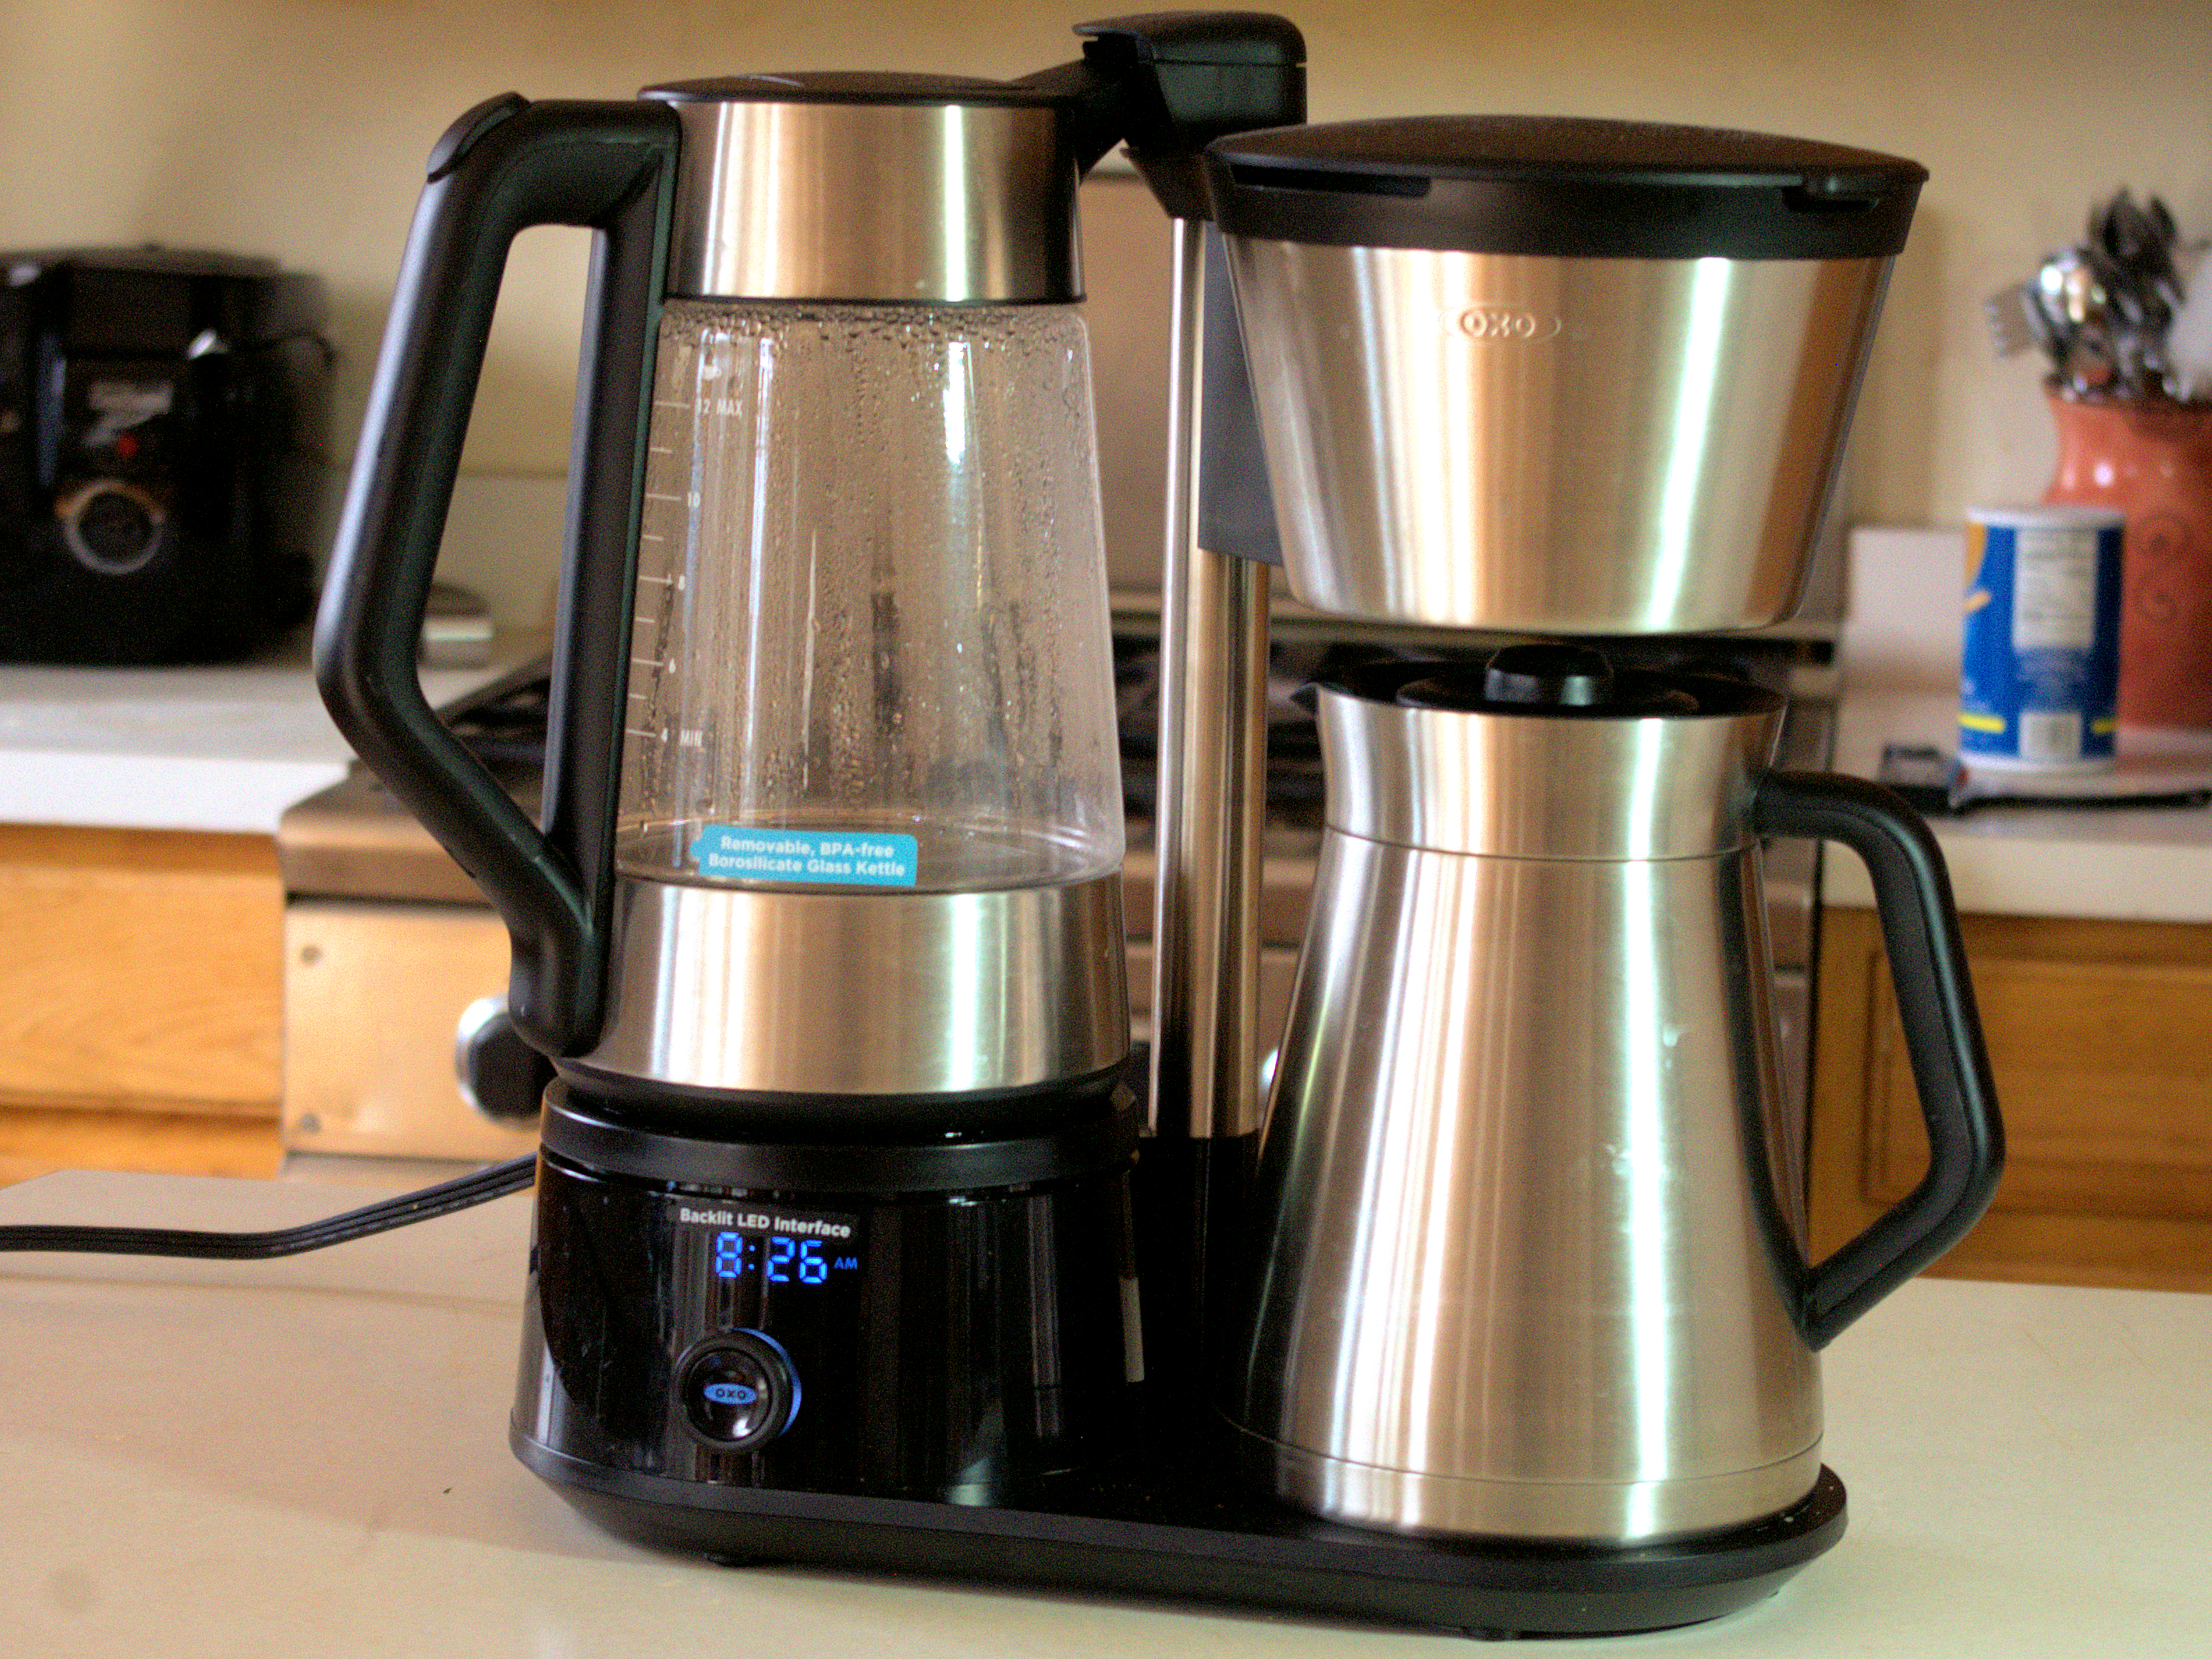 OXO On 12 Cup Coffee Maker